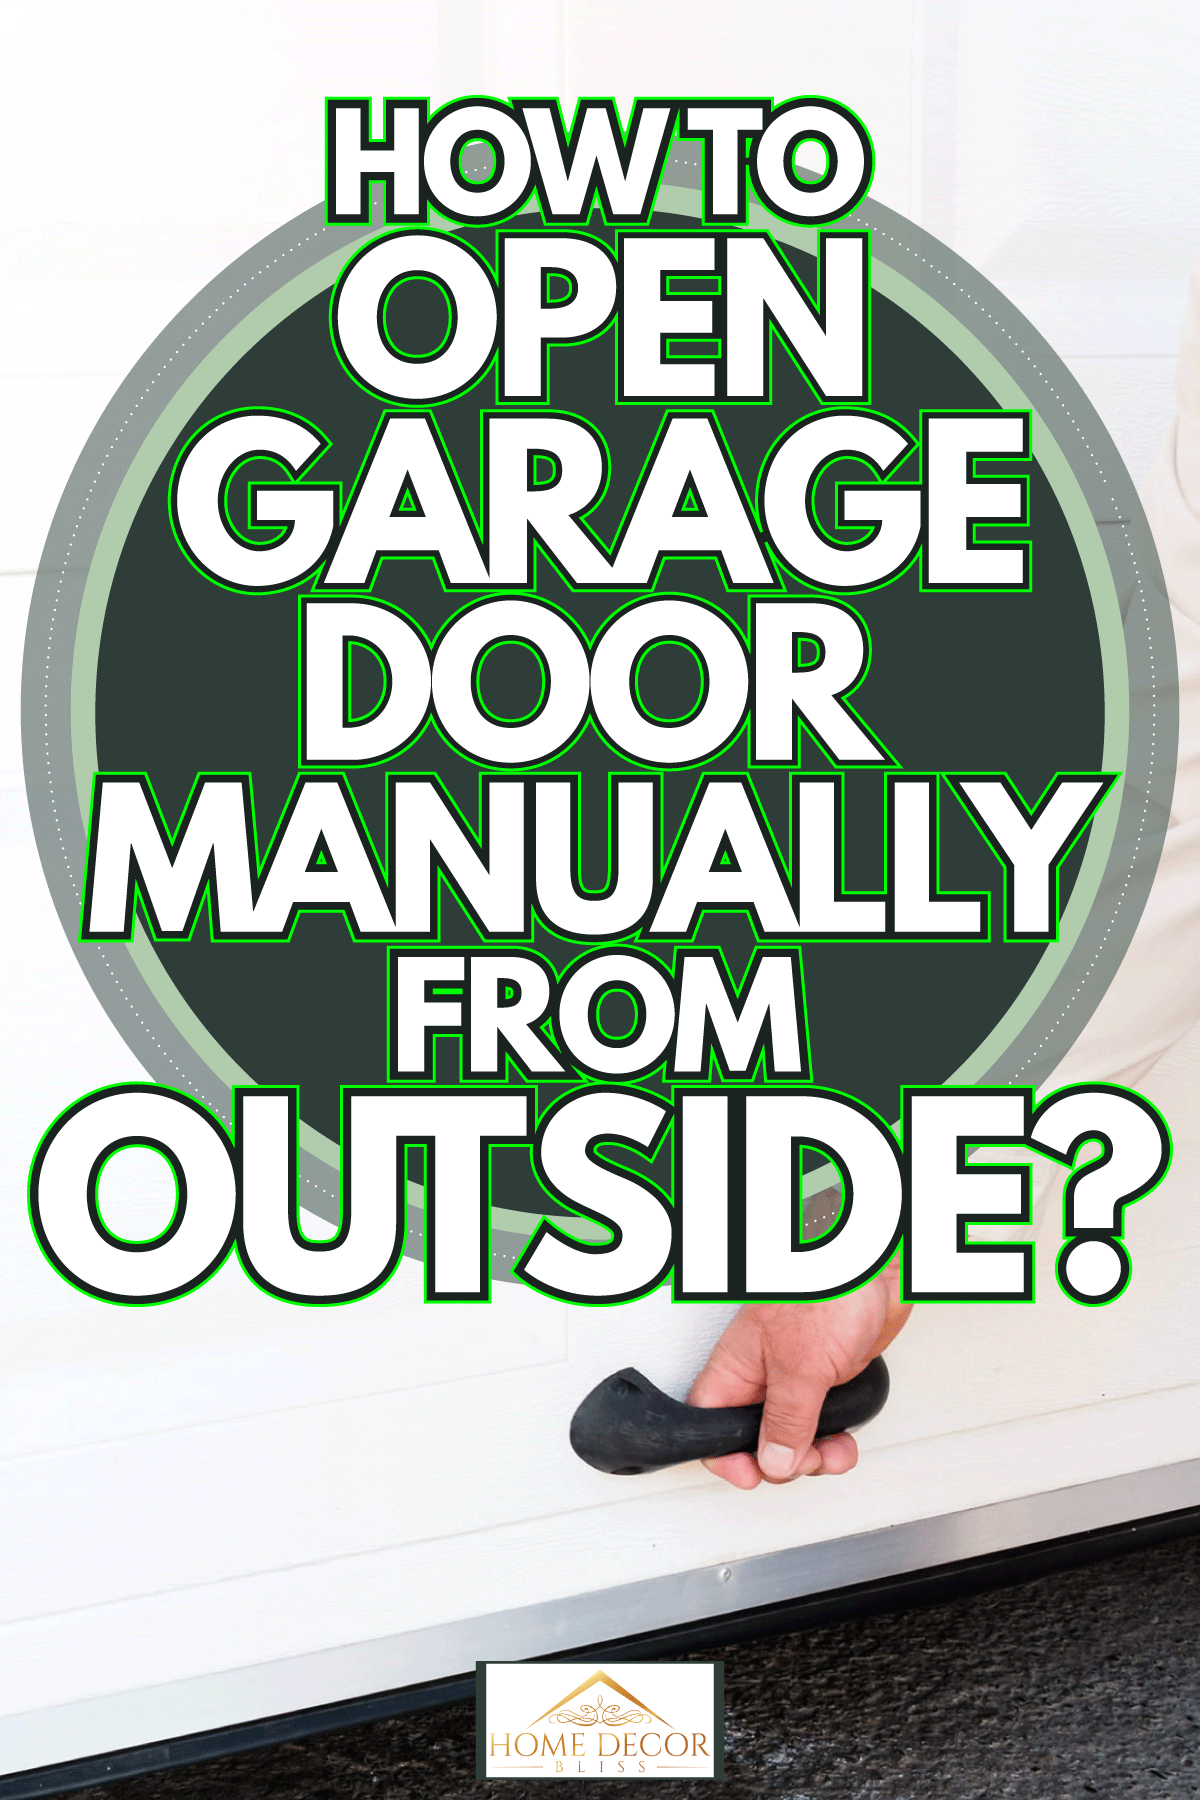 Manually opening garage from outside, How to open garage door manually from outside?